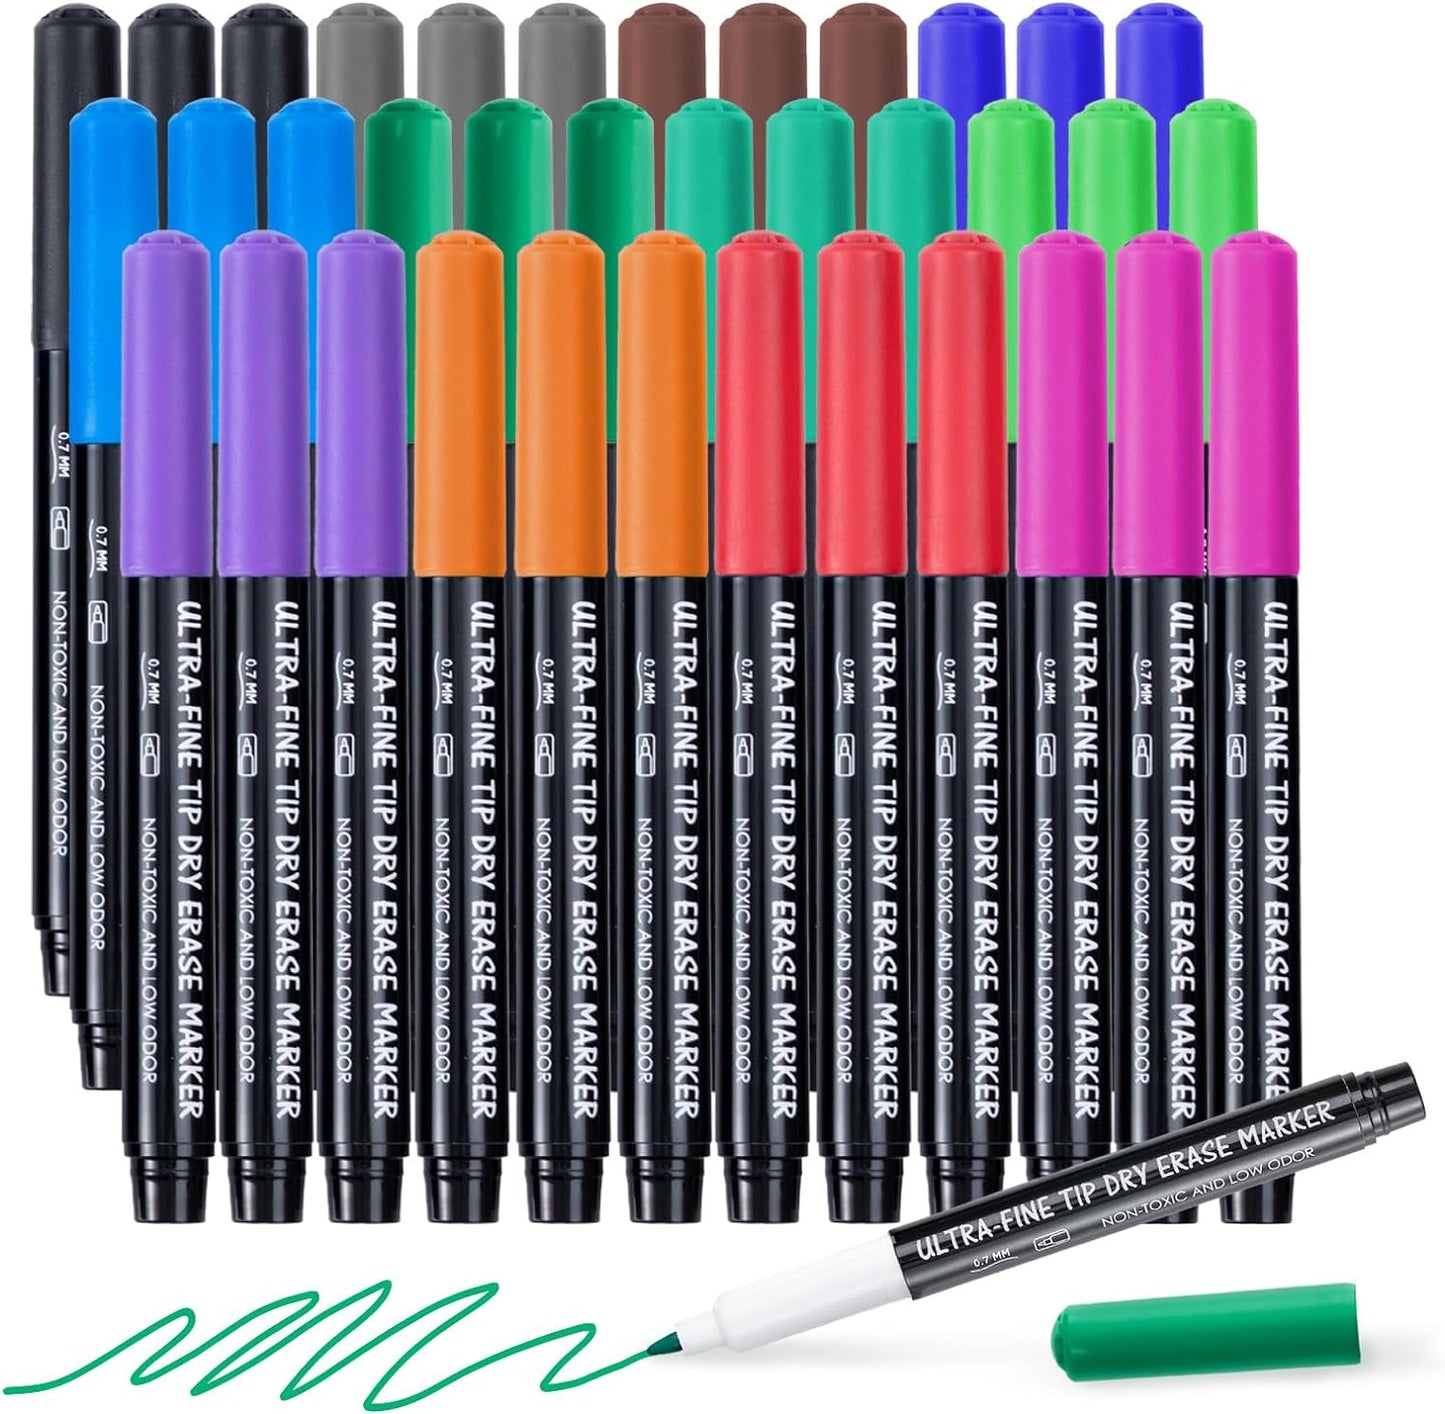 Dry Erase Markers Ultra Fine Tip, 0.7Mm, Low Odor, Extra Fine Point Dry Erase Markers for Planning Whiteboard, Calendar Boards, 12 Count Assorted Colors Whiteboard Markers for Kids